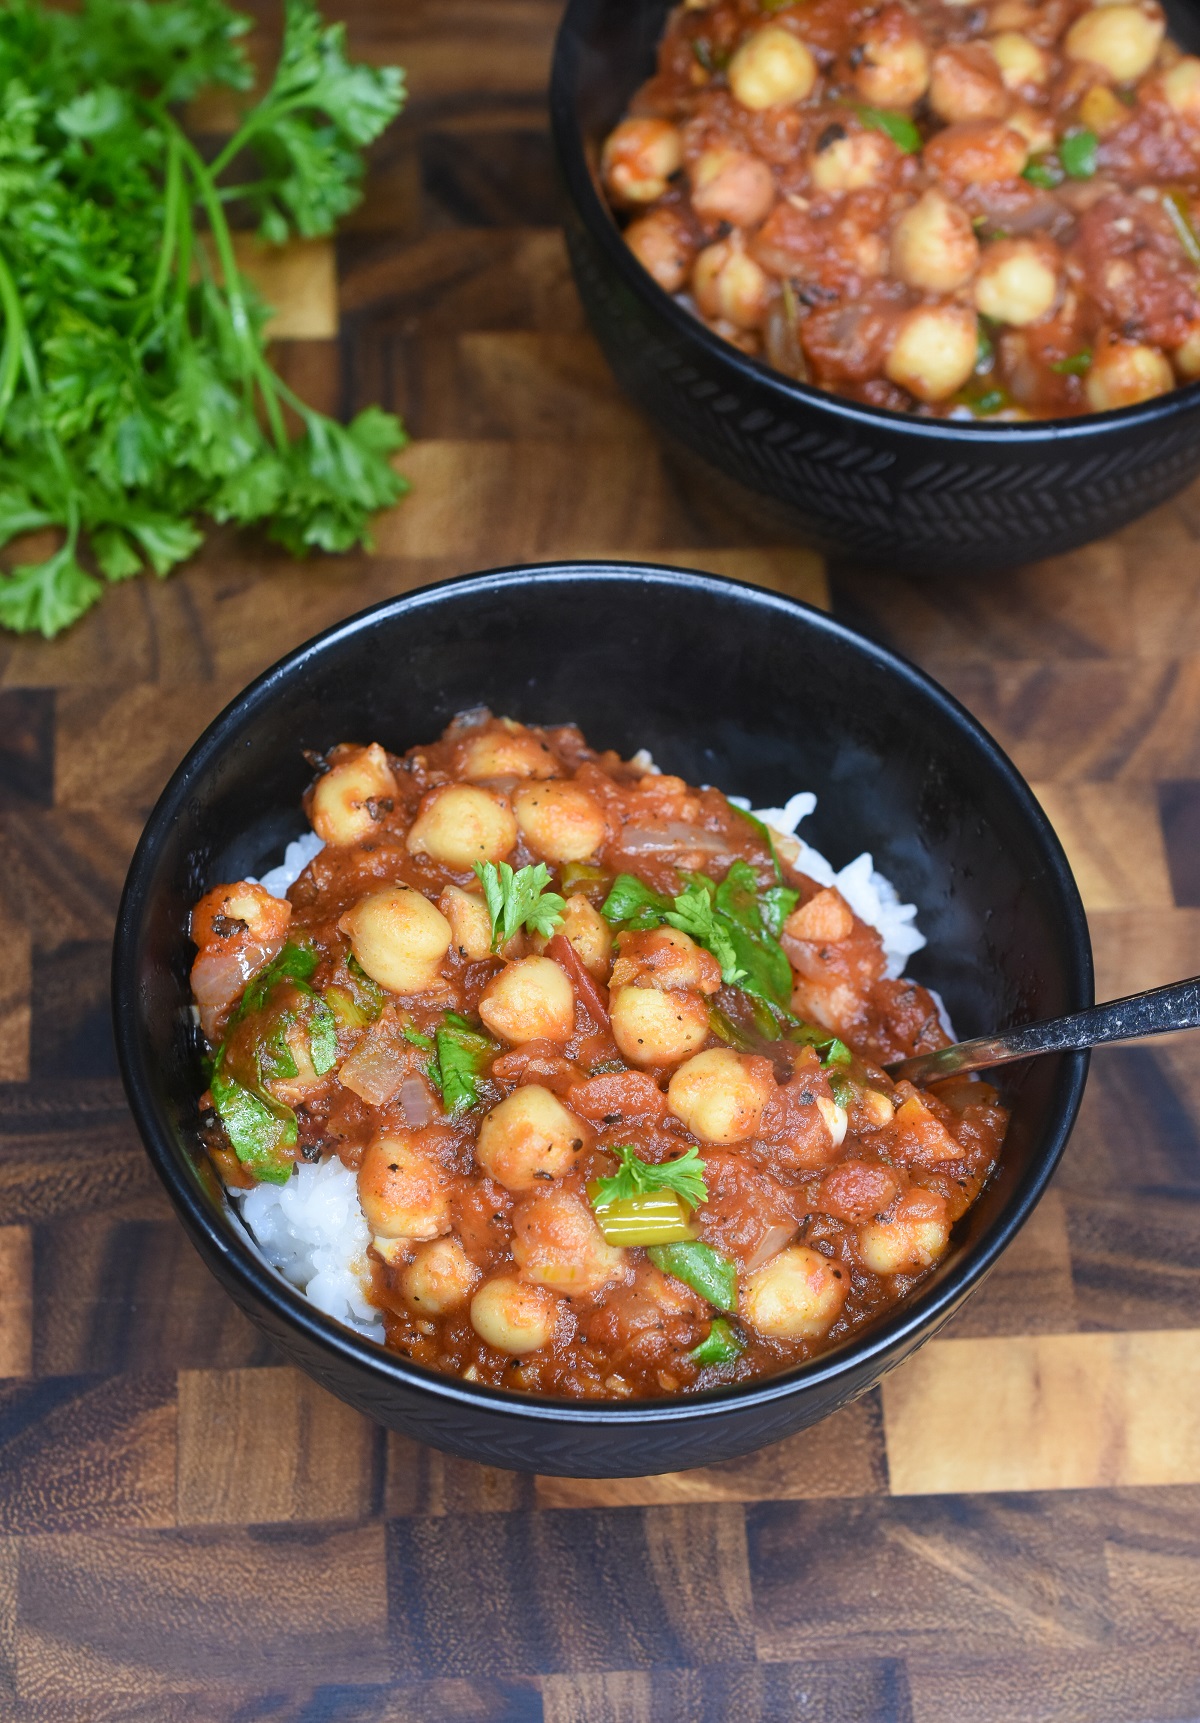 Vegan Chickpea Stew Recipe Chickpeas and tomatoes are a flavorful combination